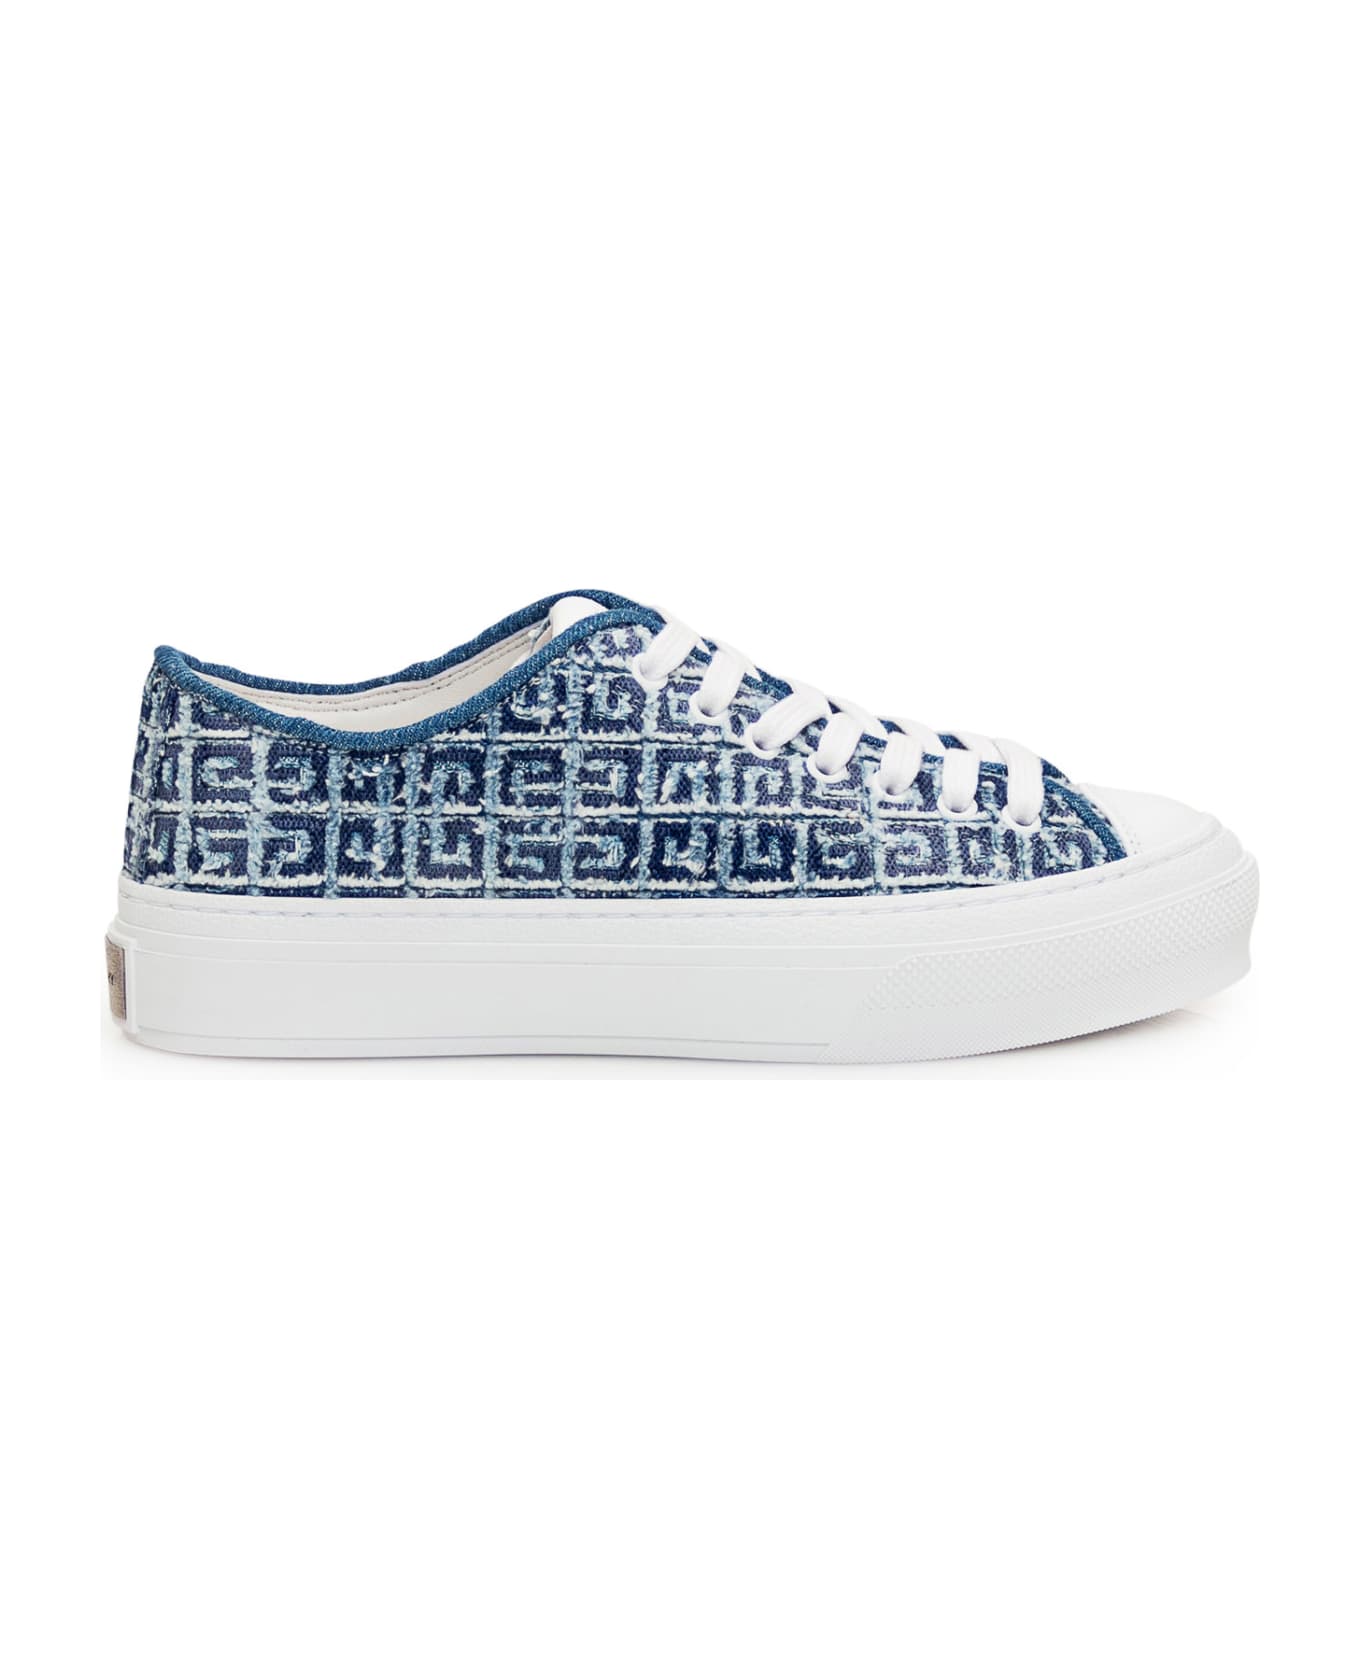 Givenchy City Low Sneakers - MEDIUM BLUE